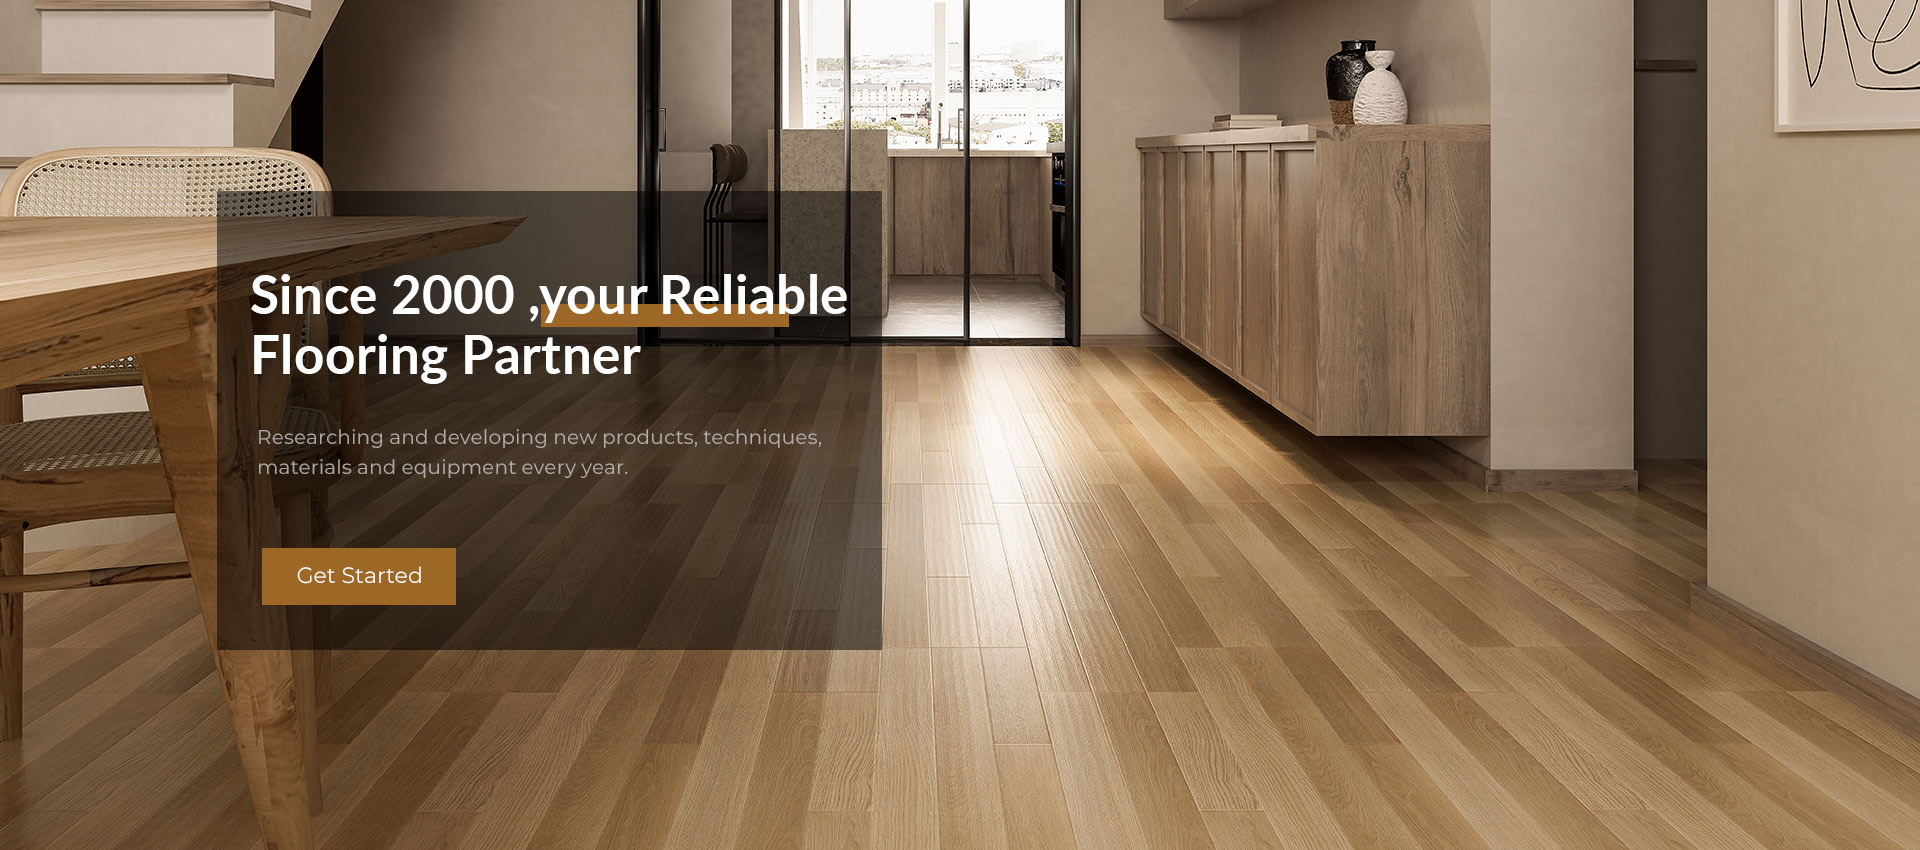 Since 2000 ,your Reliable Flooring Partner